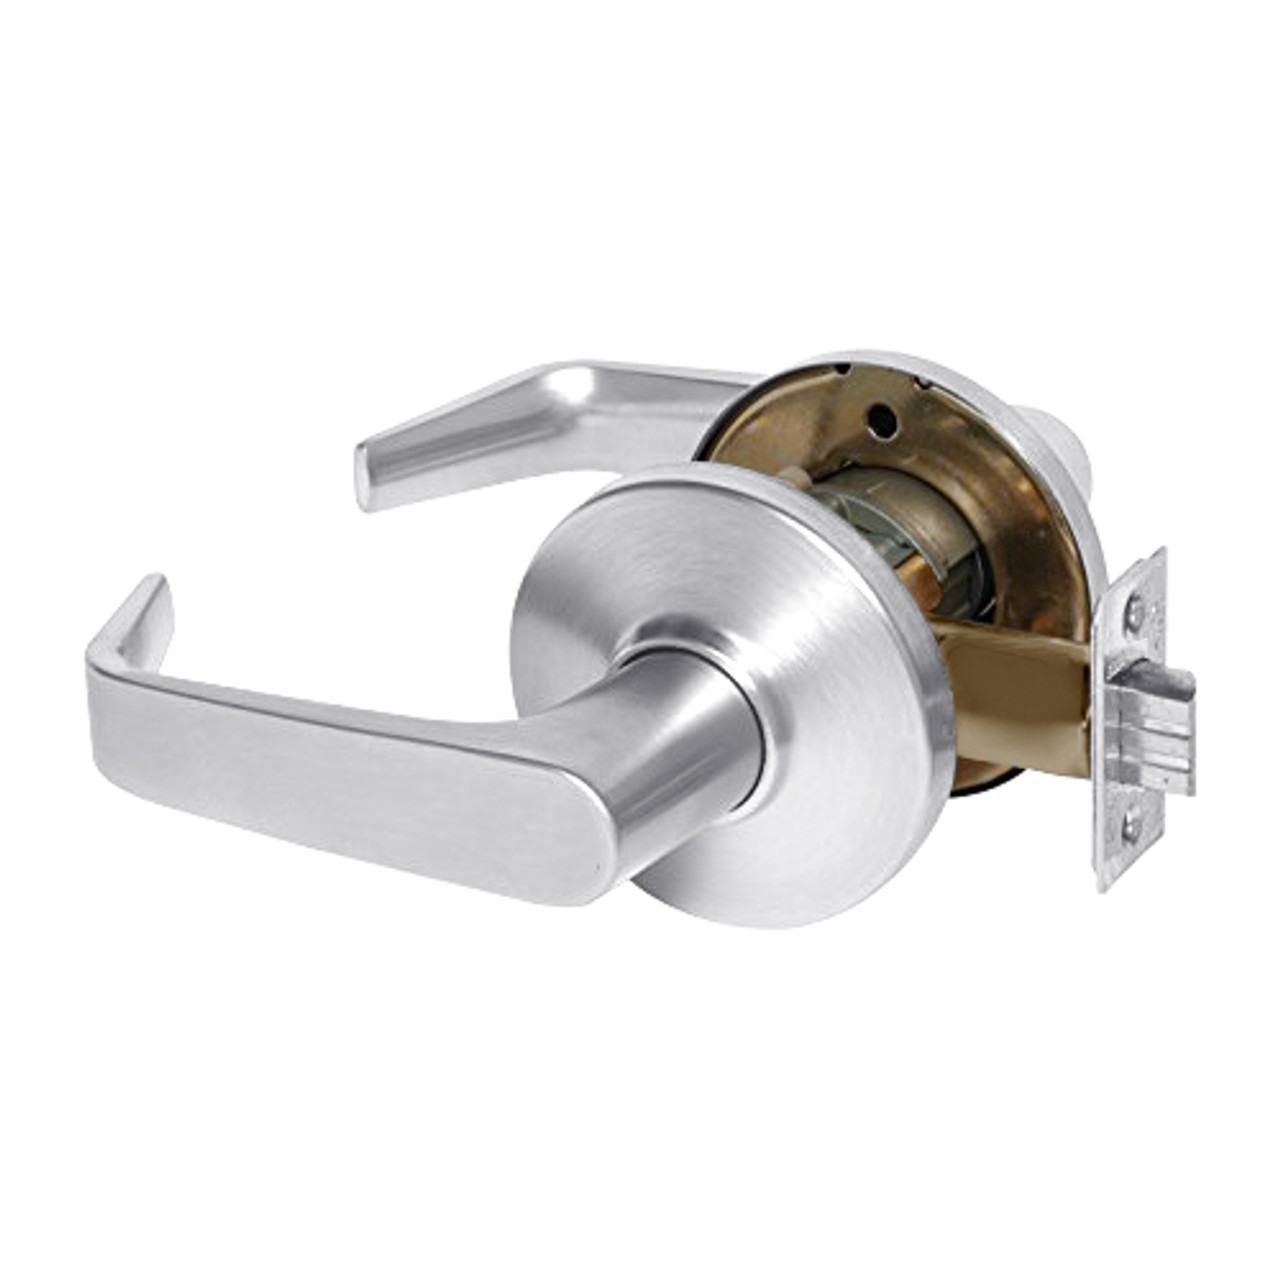 9K30N15DSTK625 Best 9K Series Passage Heavy Duty Cylindrical Lever Locks with Contour Angle with Return Lever Design in Bright Chrome